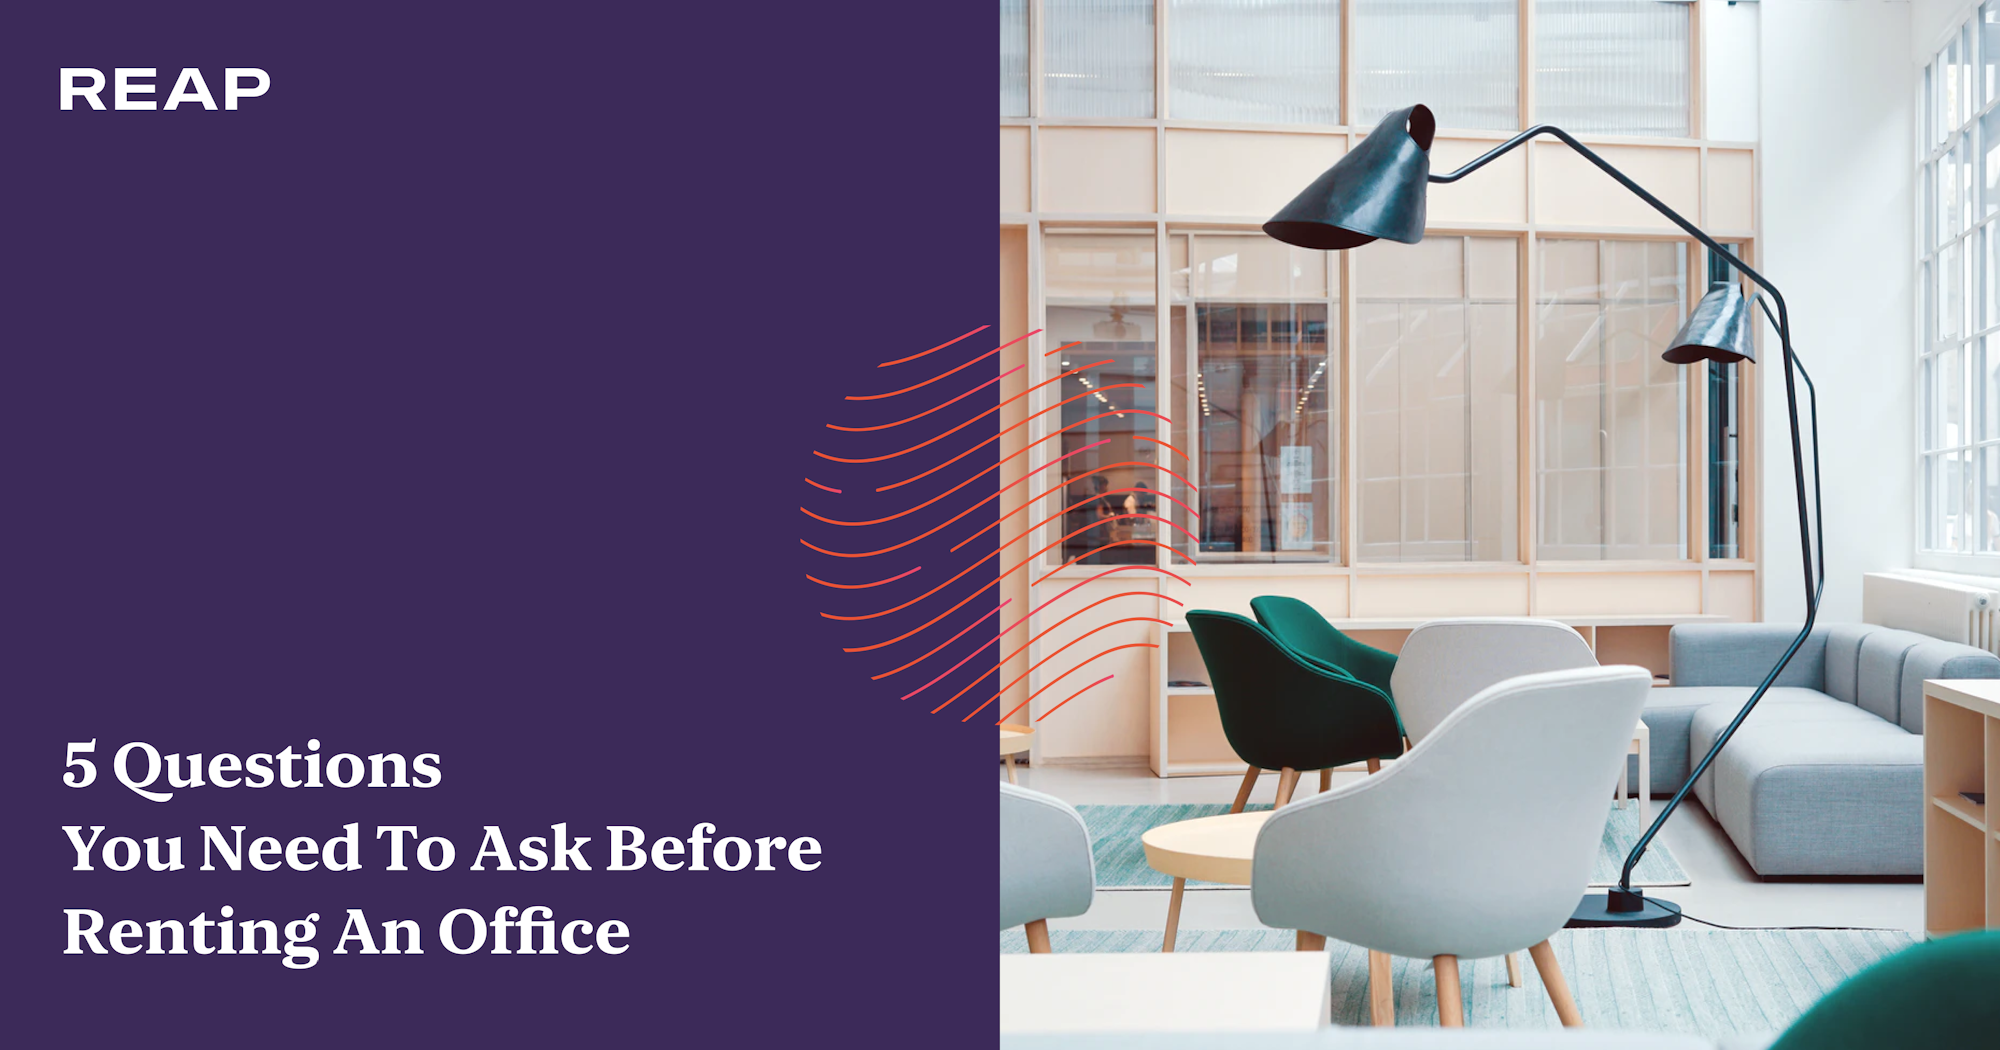 5 questions you need to ask before renting an office | Reap